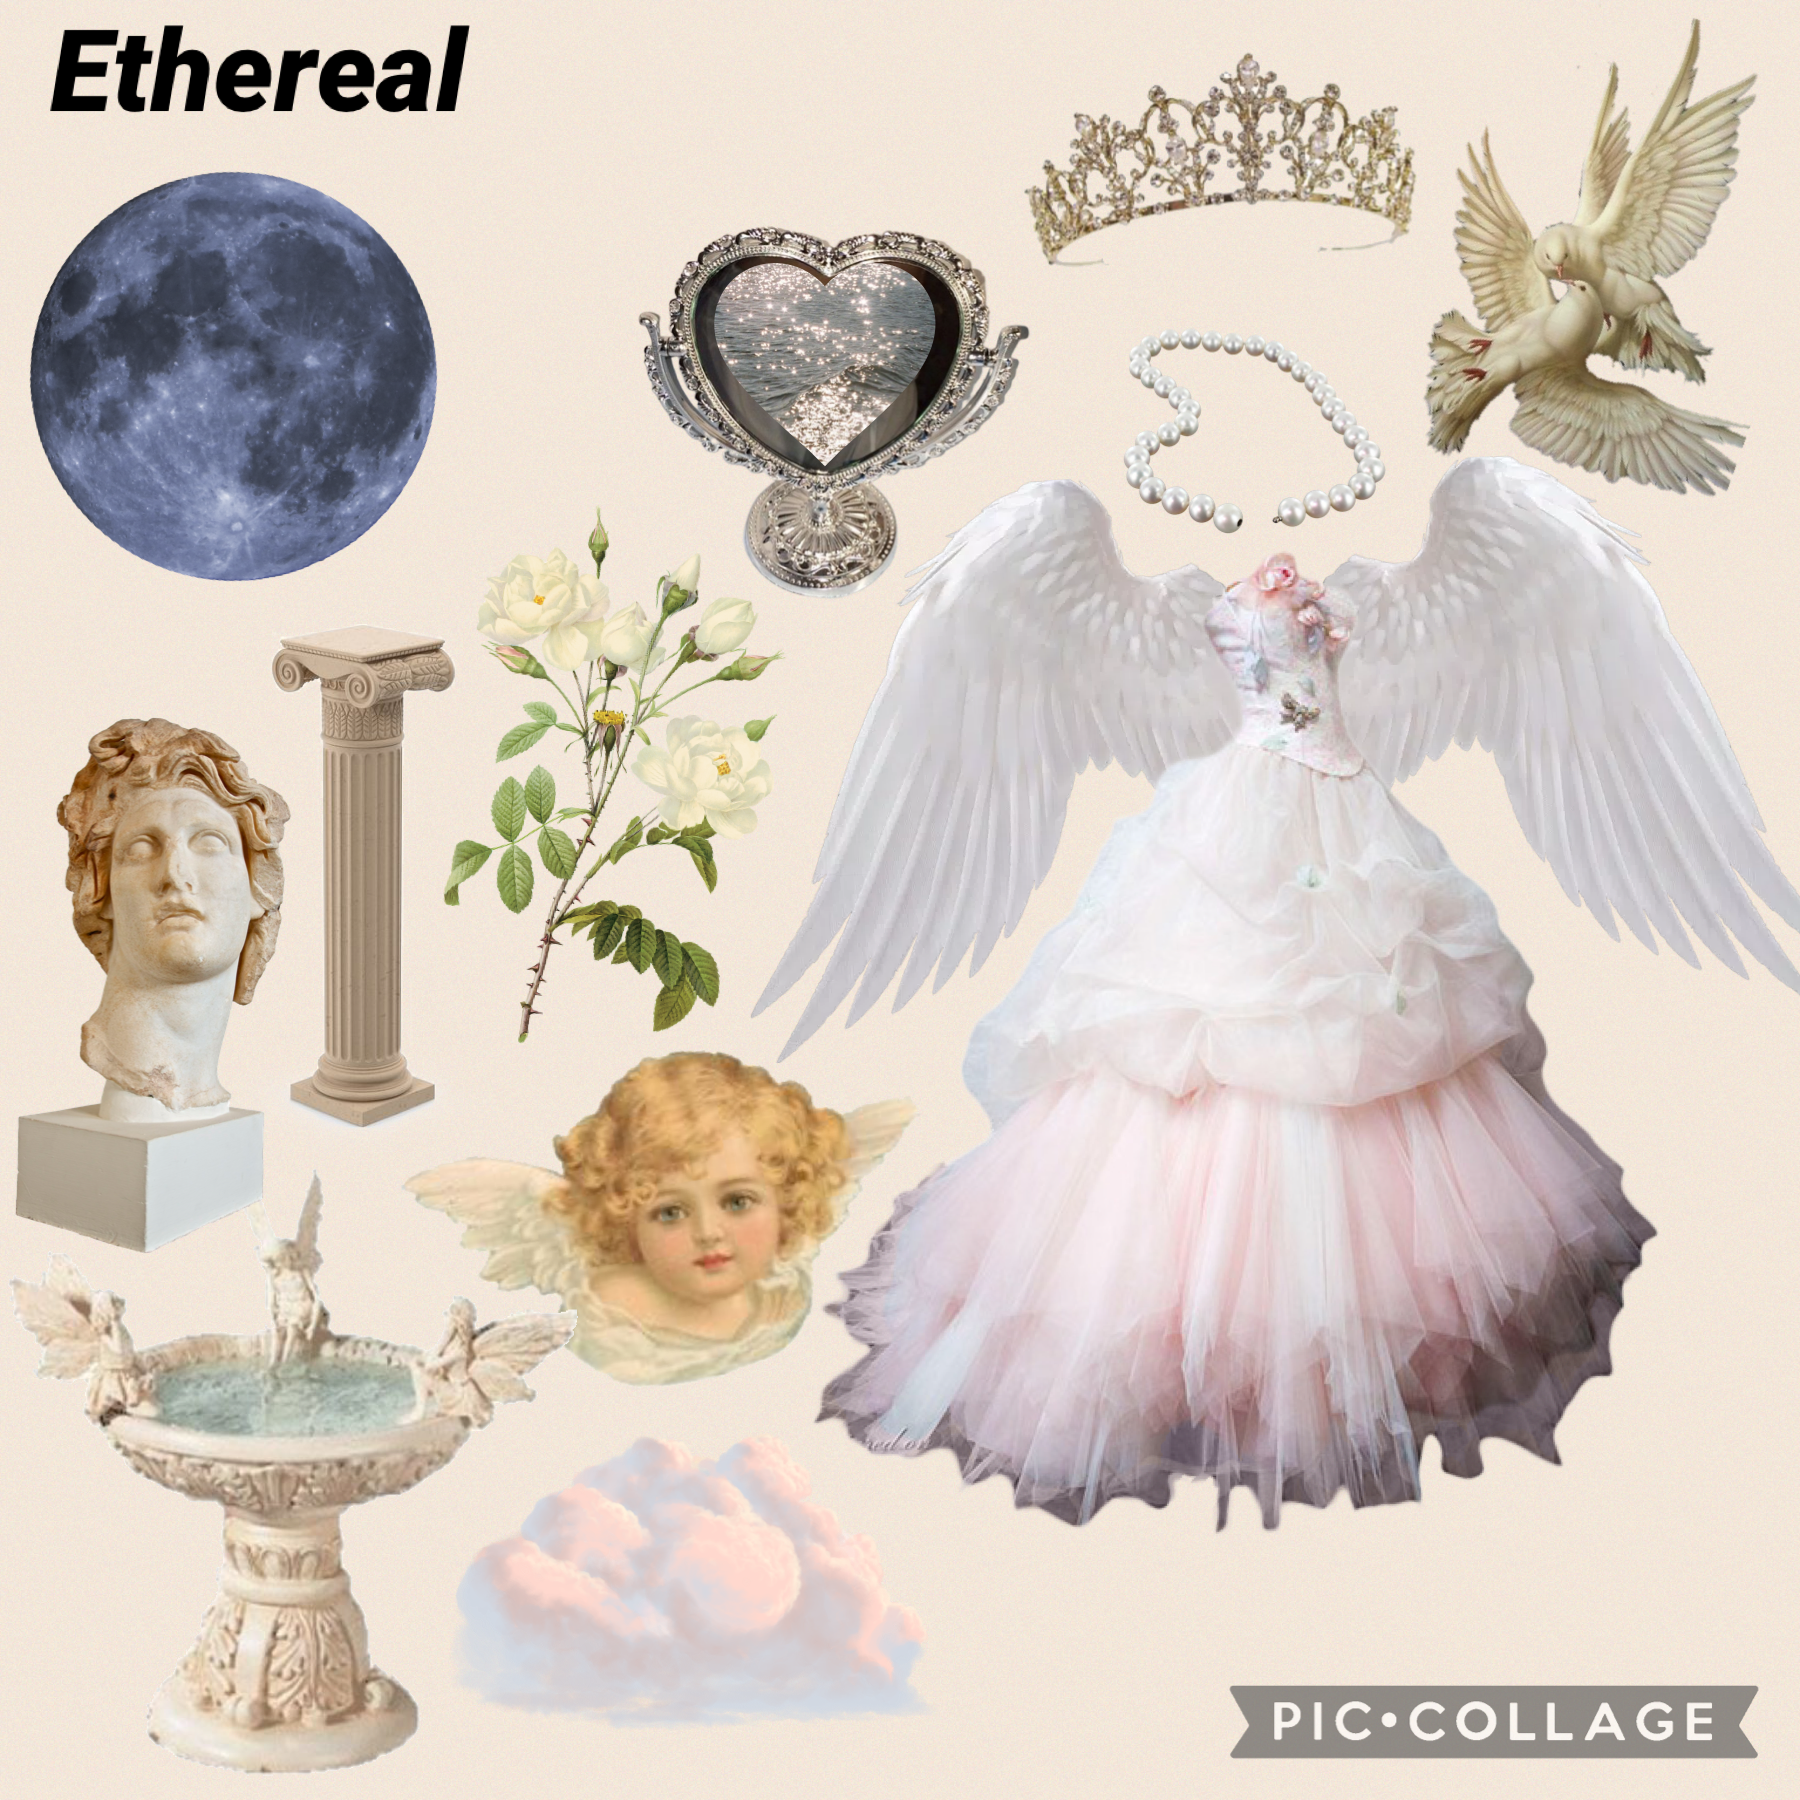 Ethereal… ⛅️ 🕊 🌝 